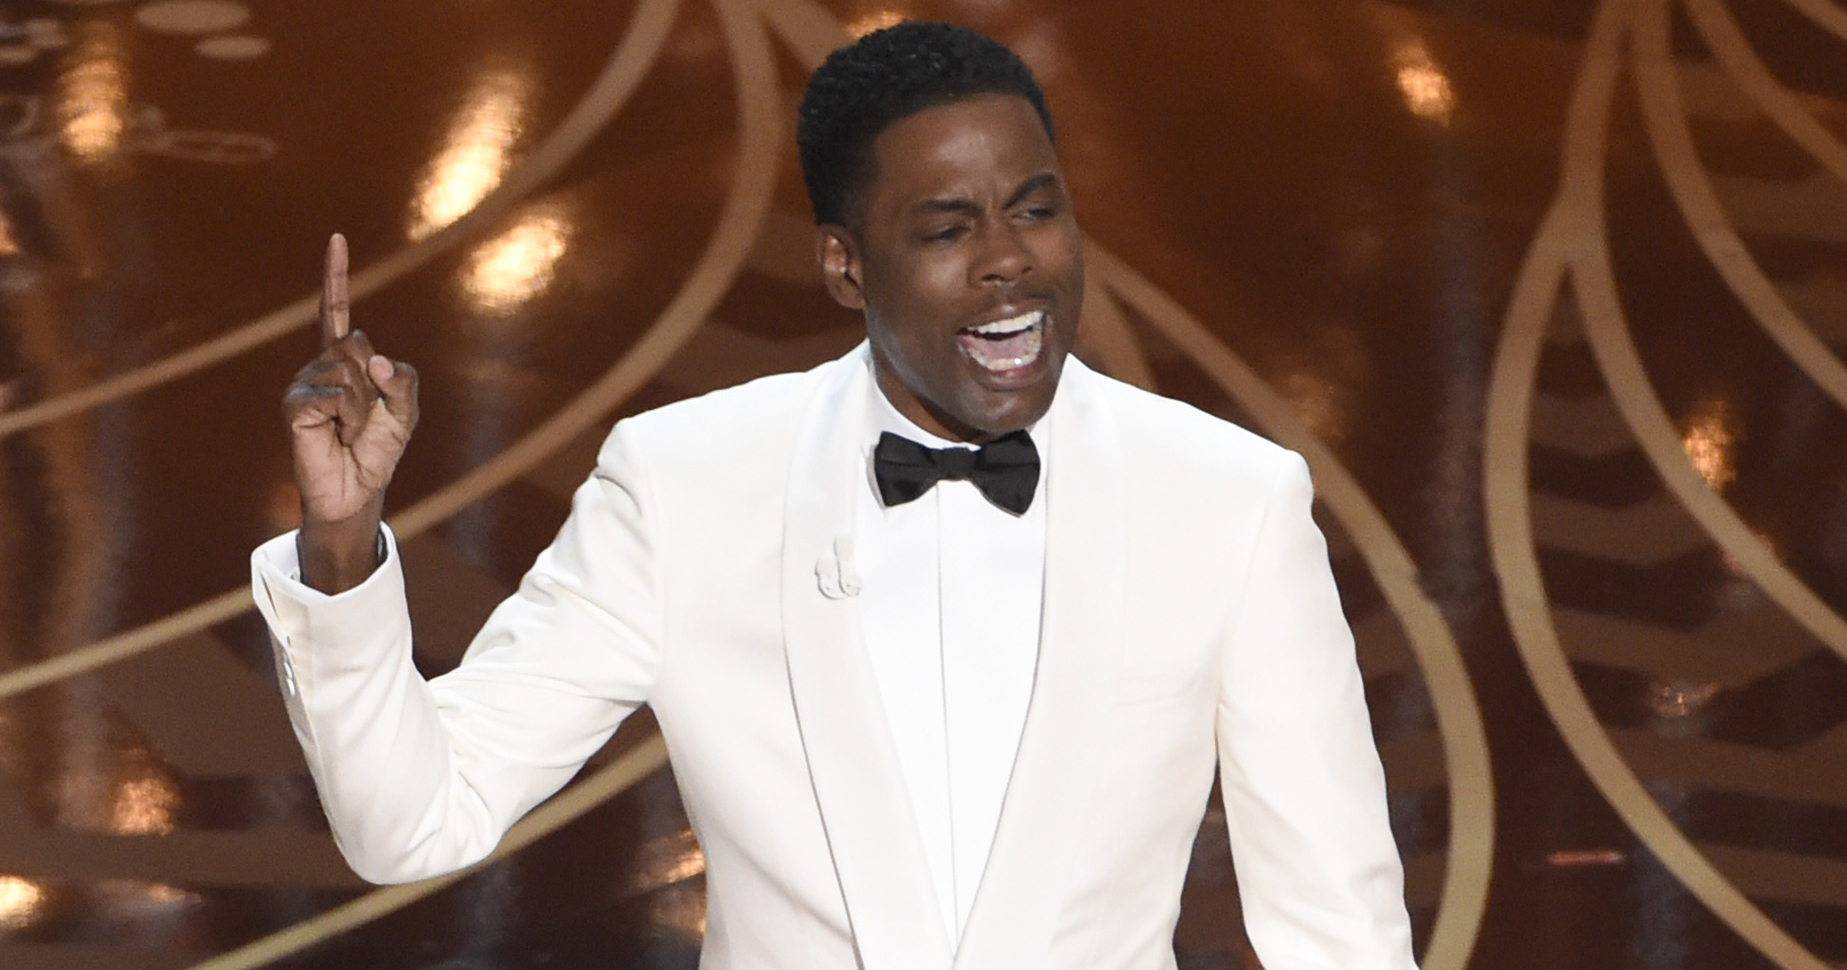 Chris Rock speaks at the Oscars on Feb. 28, 2016 in Hollywood, Calif. (Chris Pizzello—AP)